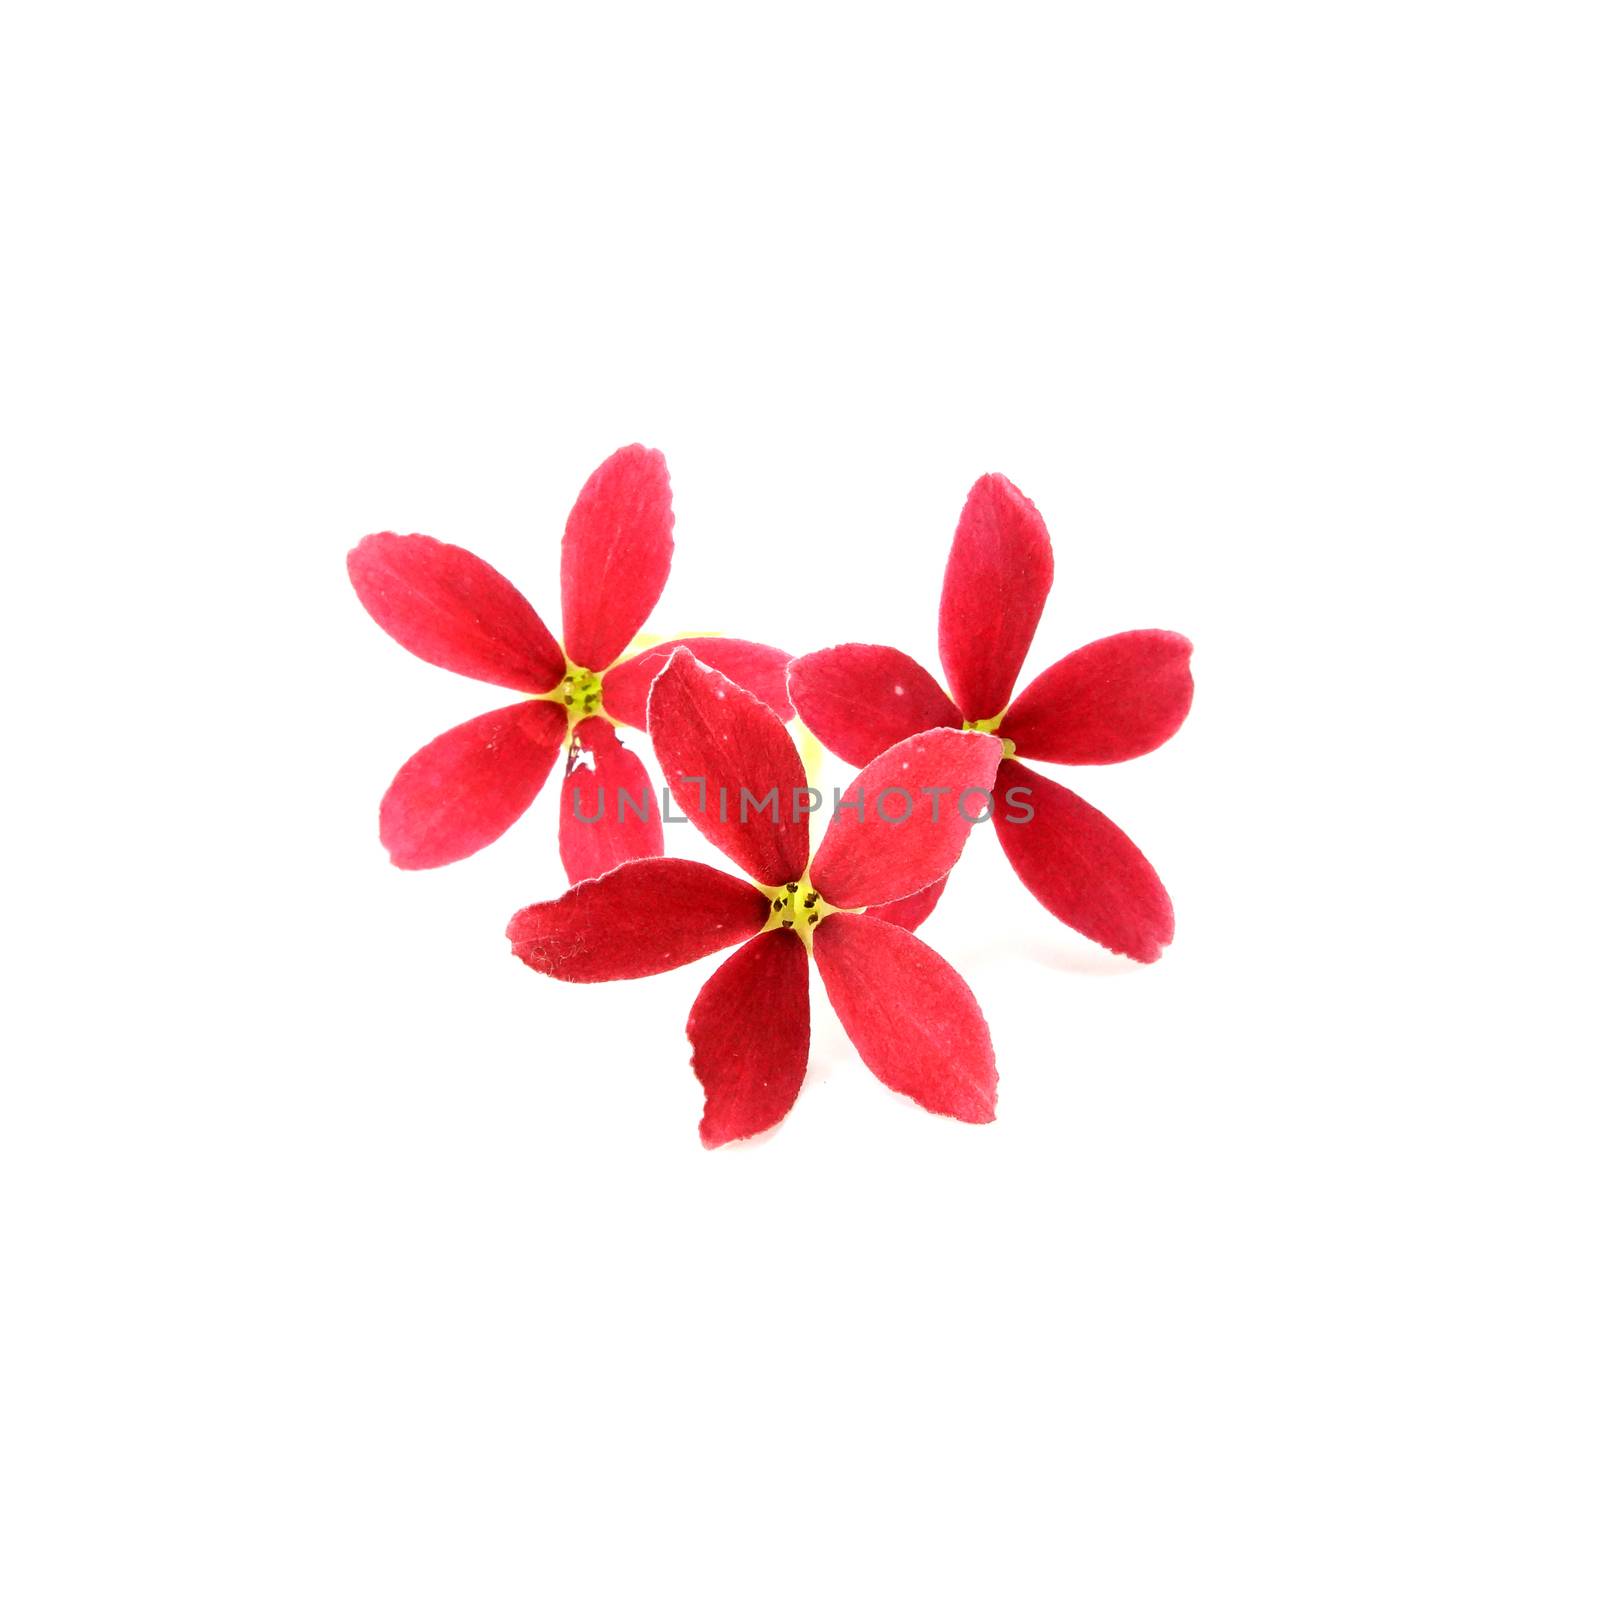 Red flower of Rangoon creeper on white background. by Noppharat_th